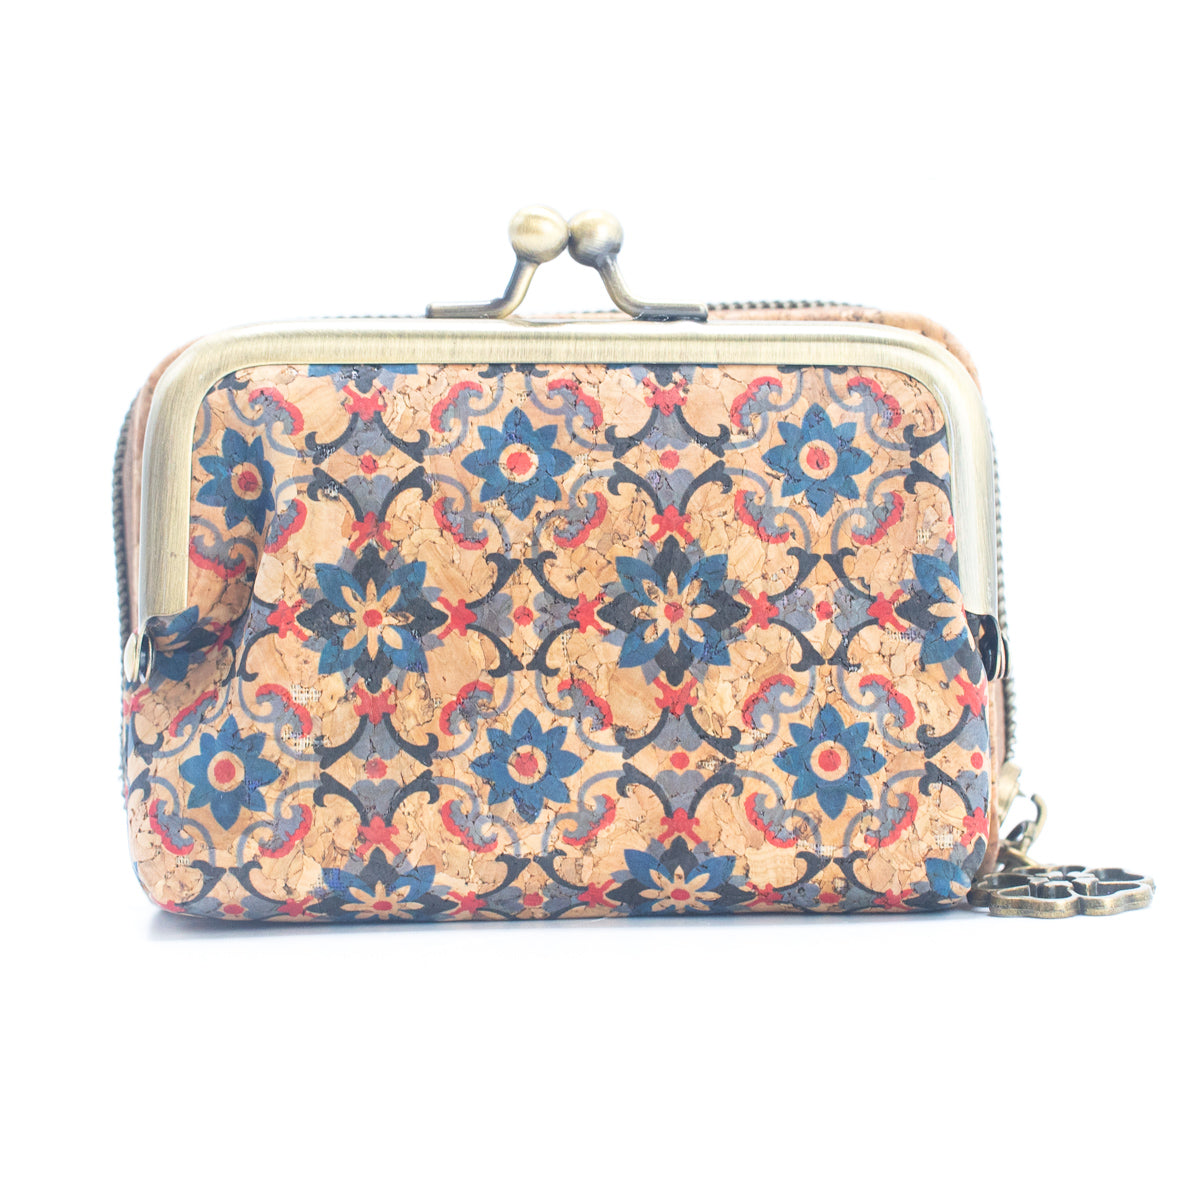 Cork Card Wallets w/ Floral Patterns Purse | THE CORK COLLECTION